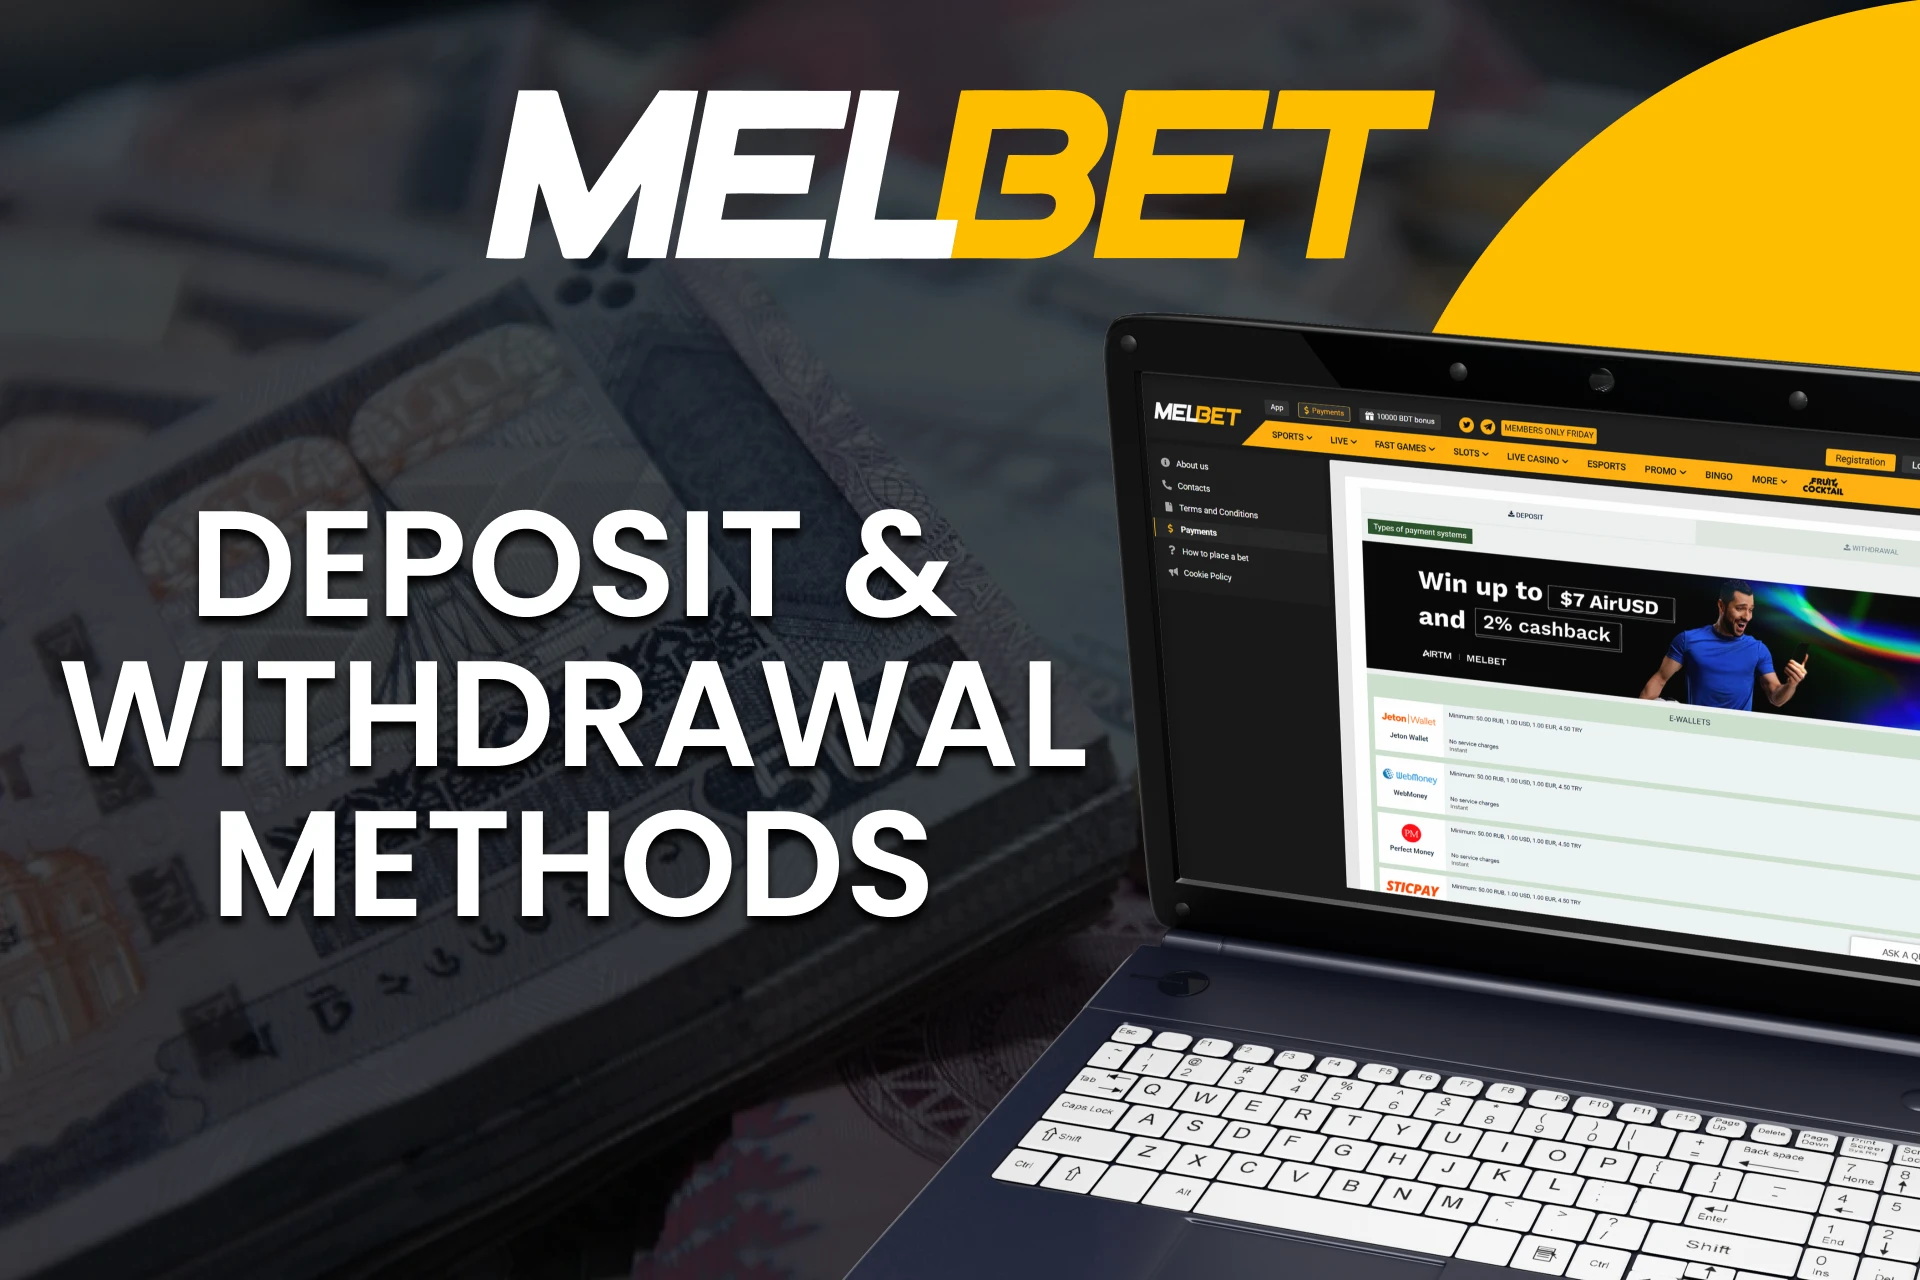 Use the convenient deposit and withdrawal method from Melbet.